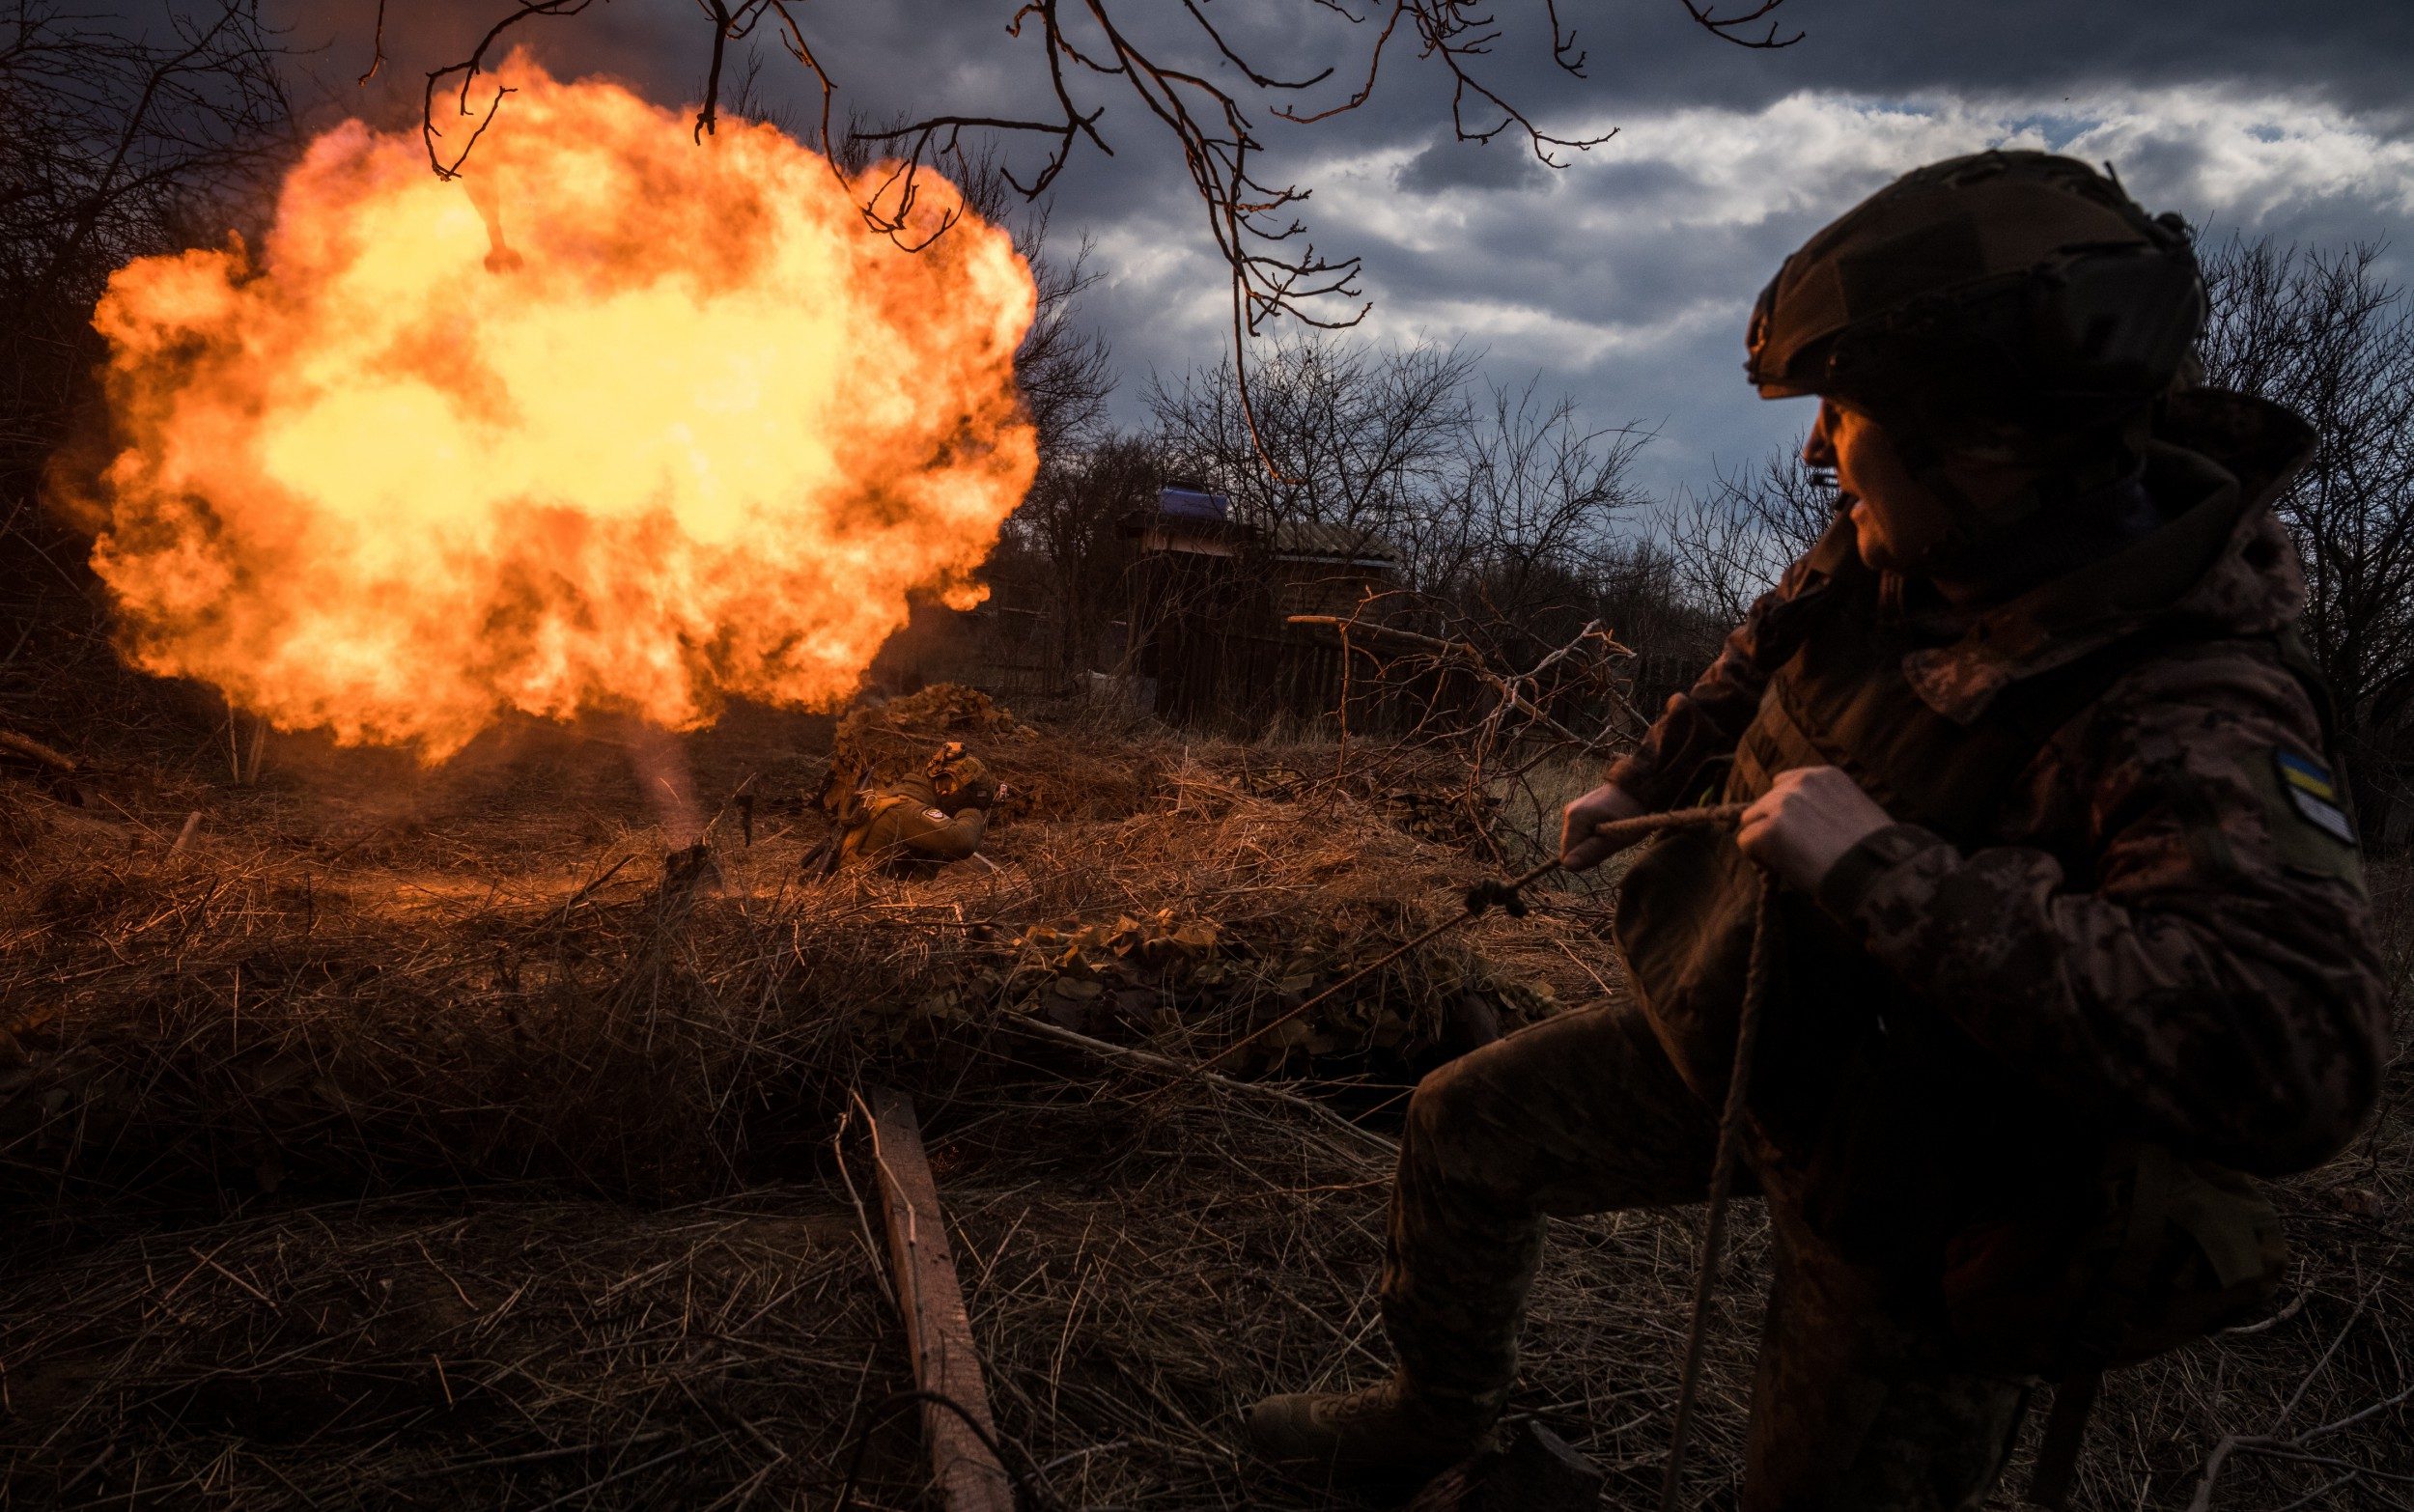 situation on ukraine frontline ‘deteriorating significantly’ in last week